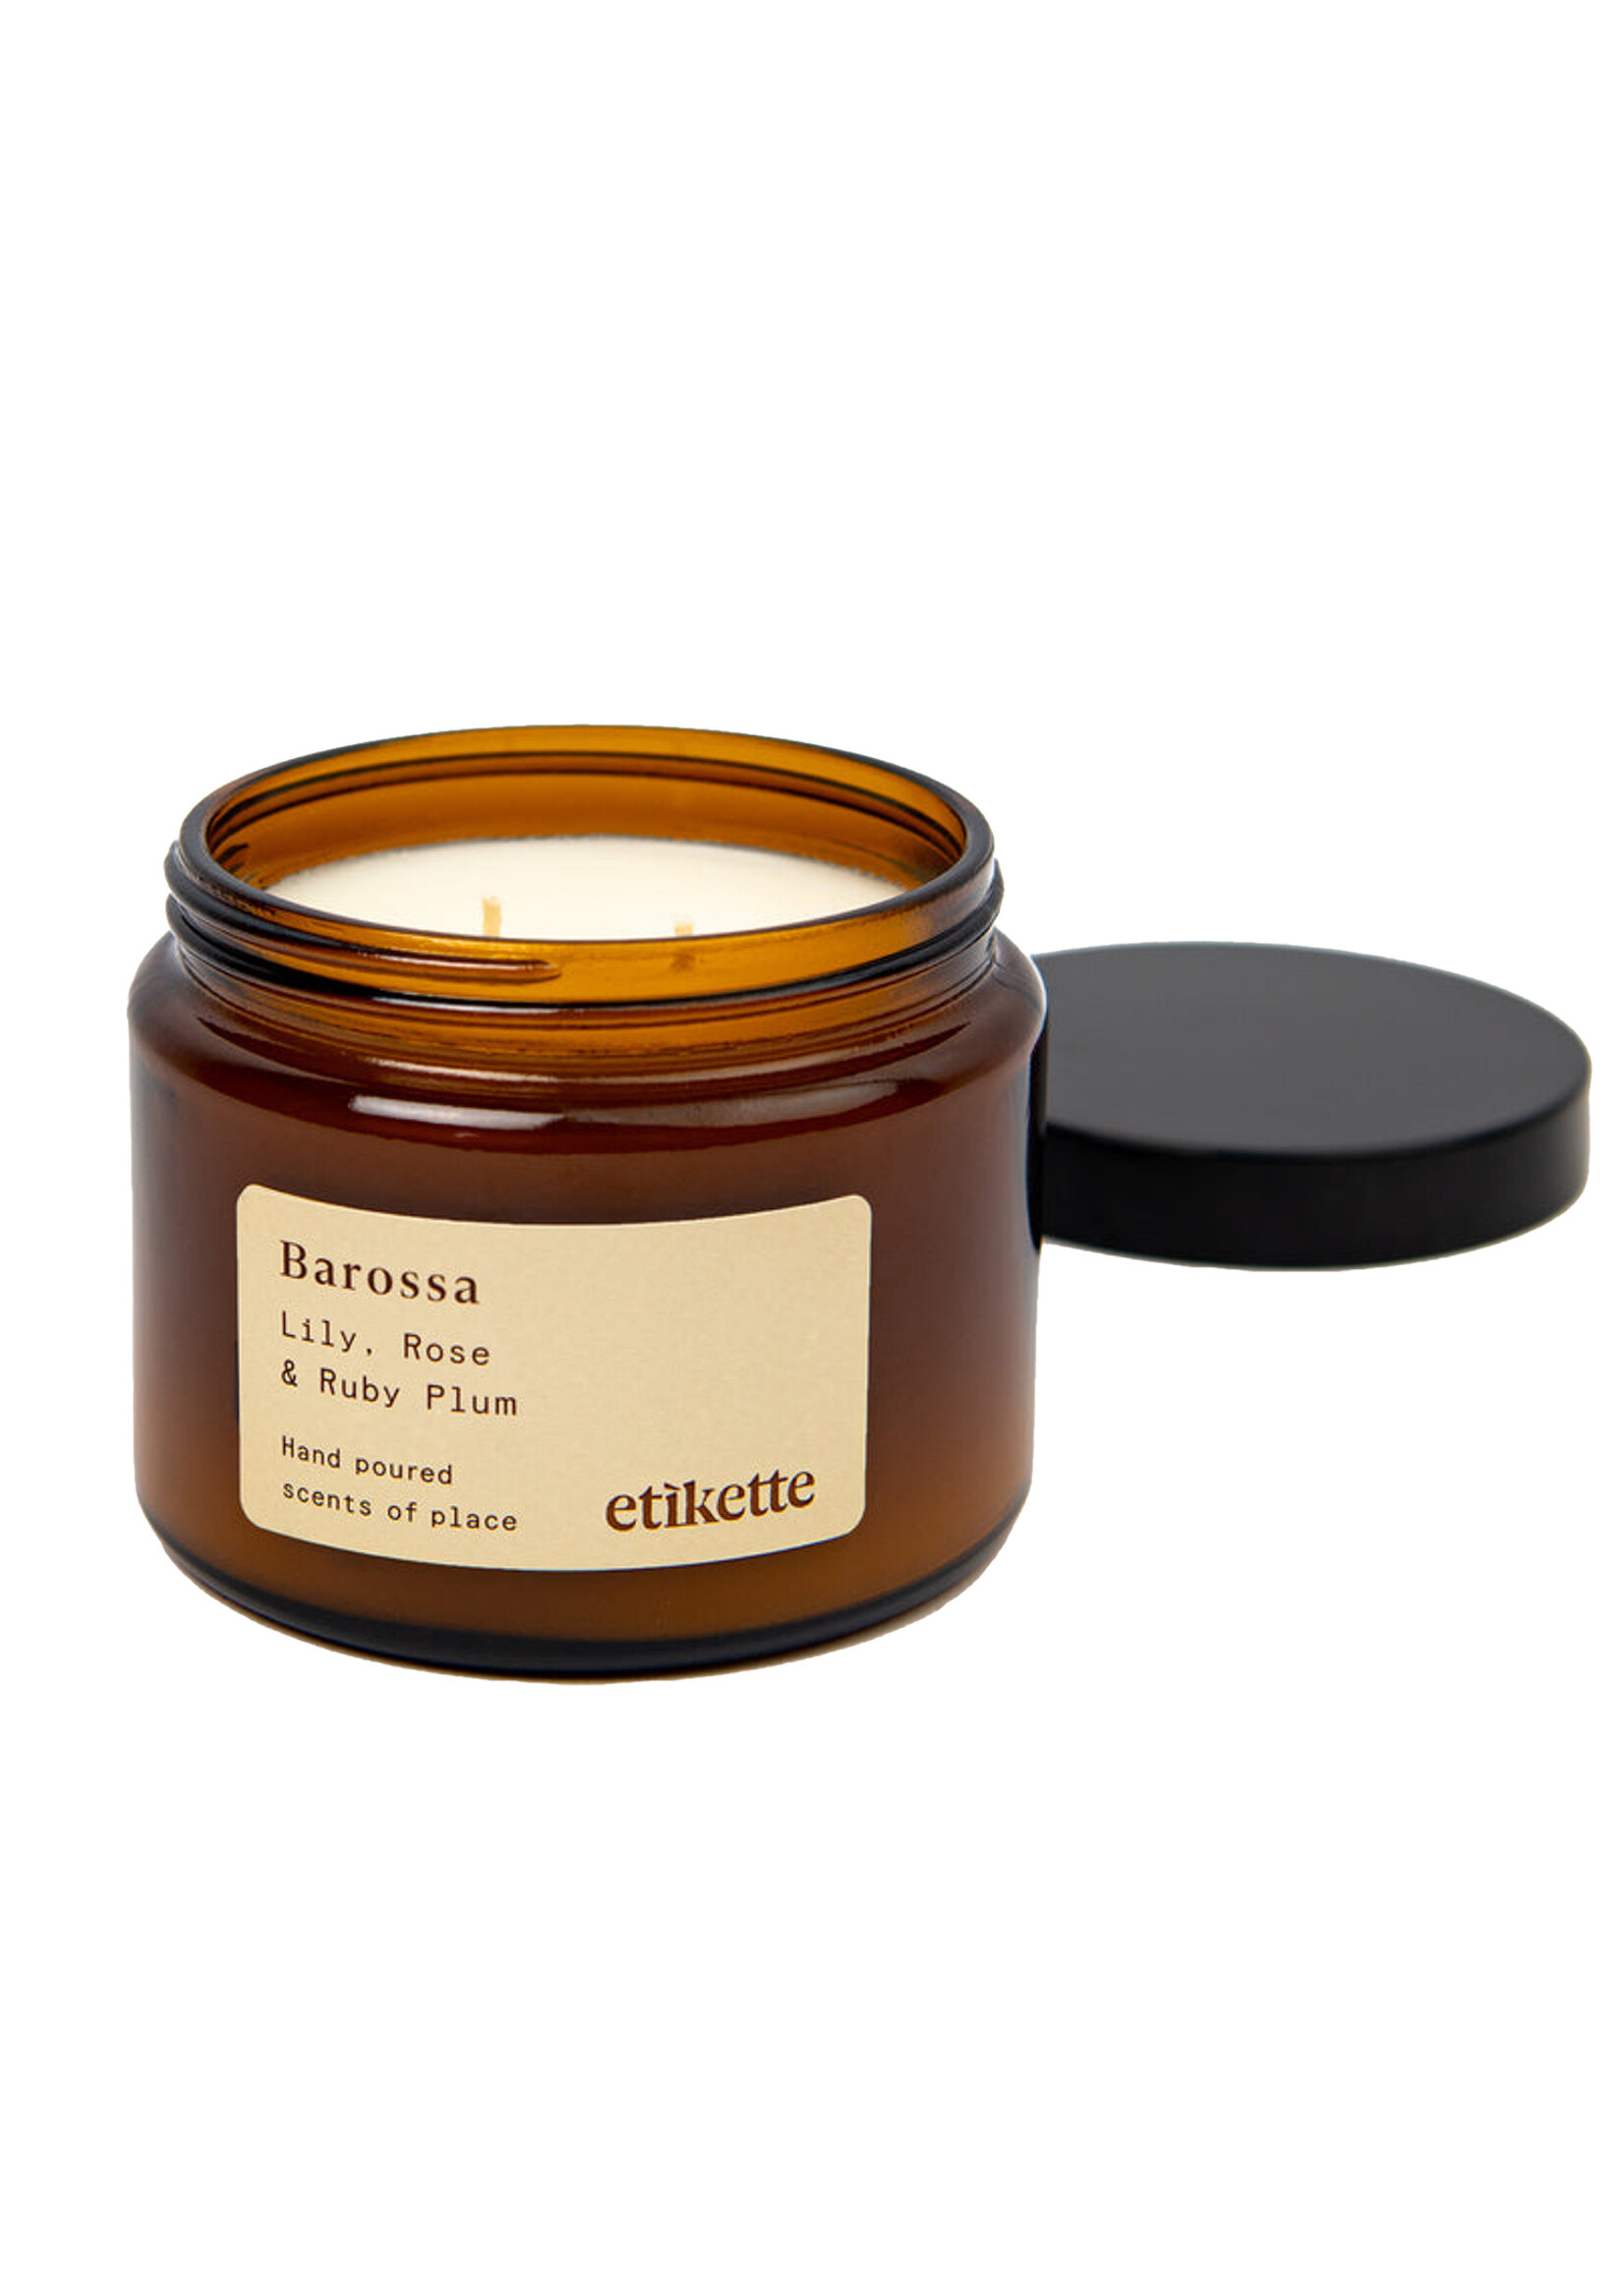 Etikette Barossa - Lily, Rose & Ruby Plum - Candle 500ml